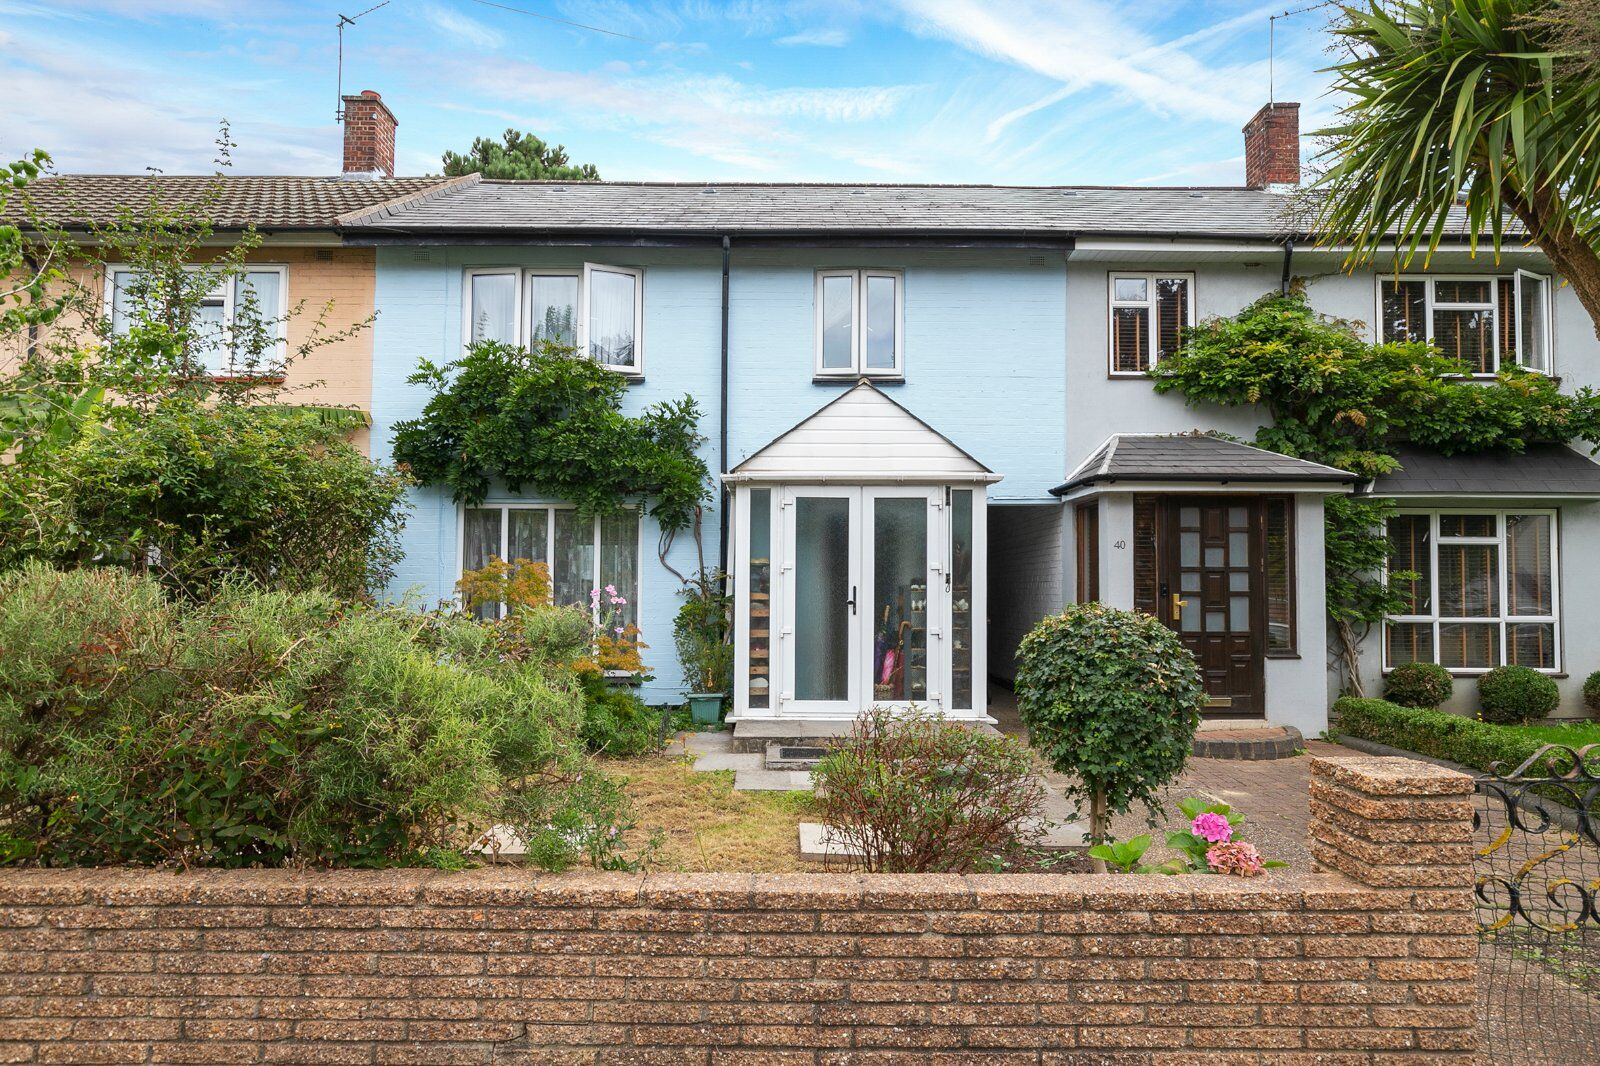 4 bedroom mid terraced house for sale Beechwood Drive, Woodford Green, IG8, main image